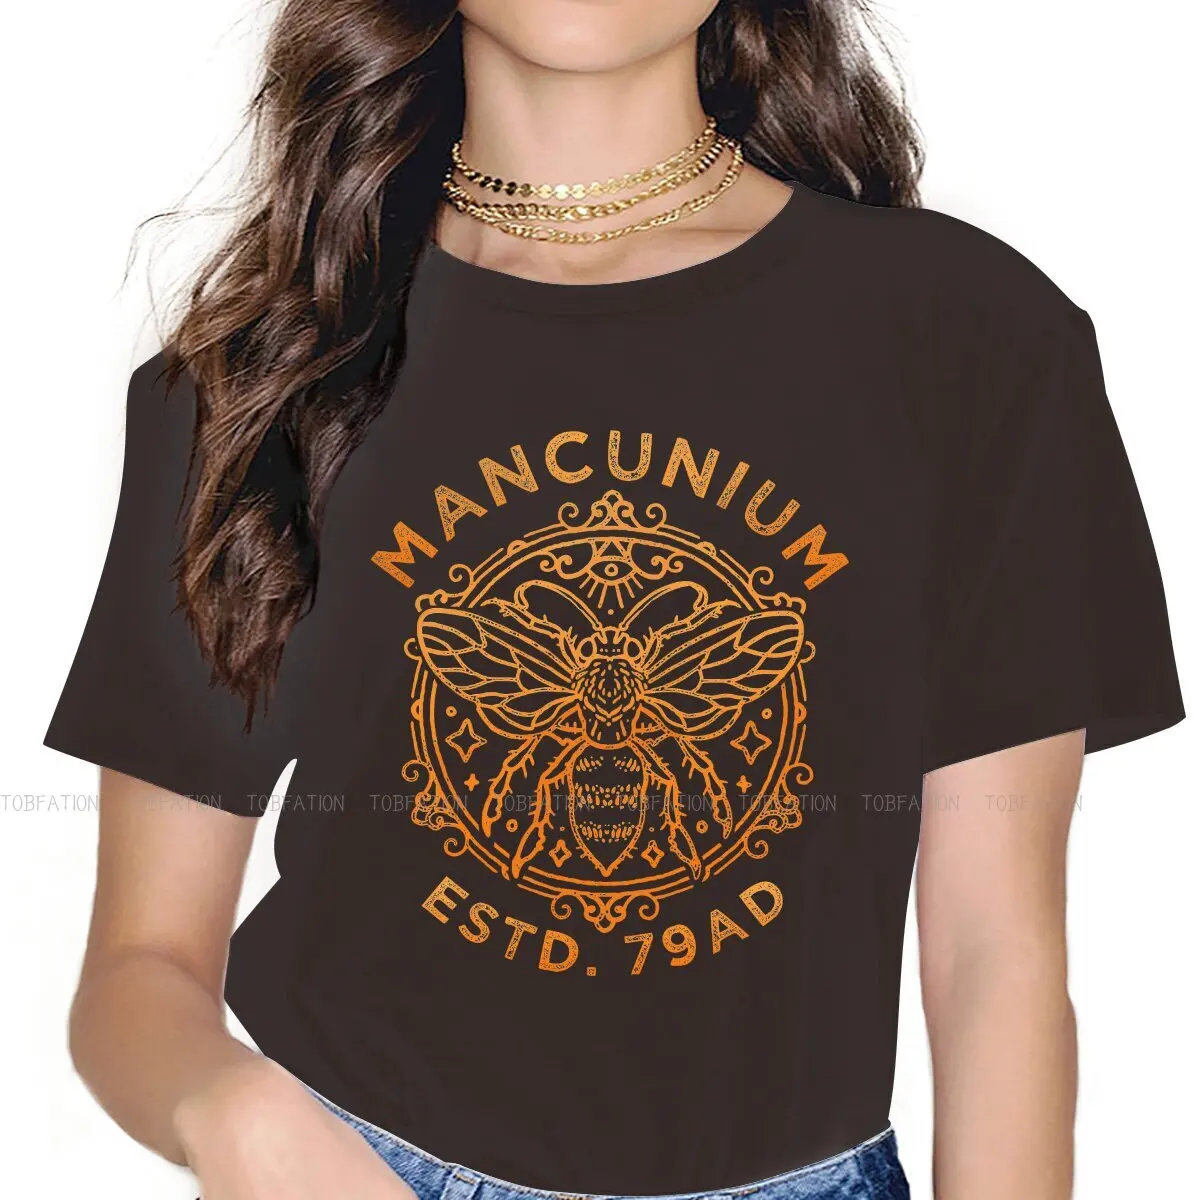 

Mancunium 79AD Manchester England Worker 4XL TShirt Beekeeping Bee Keeper Printing Comfortable T Shirt Female Unique Gift Idea